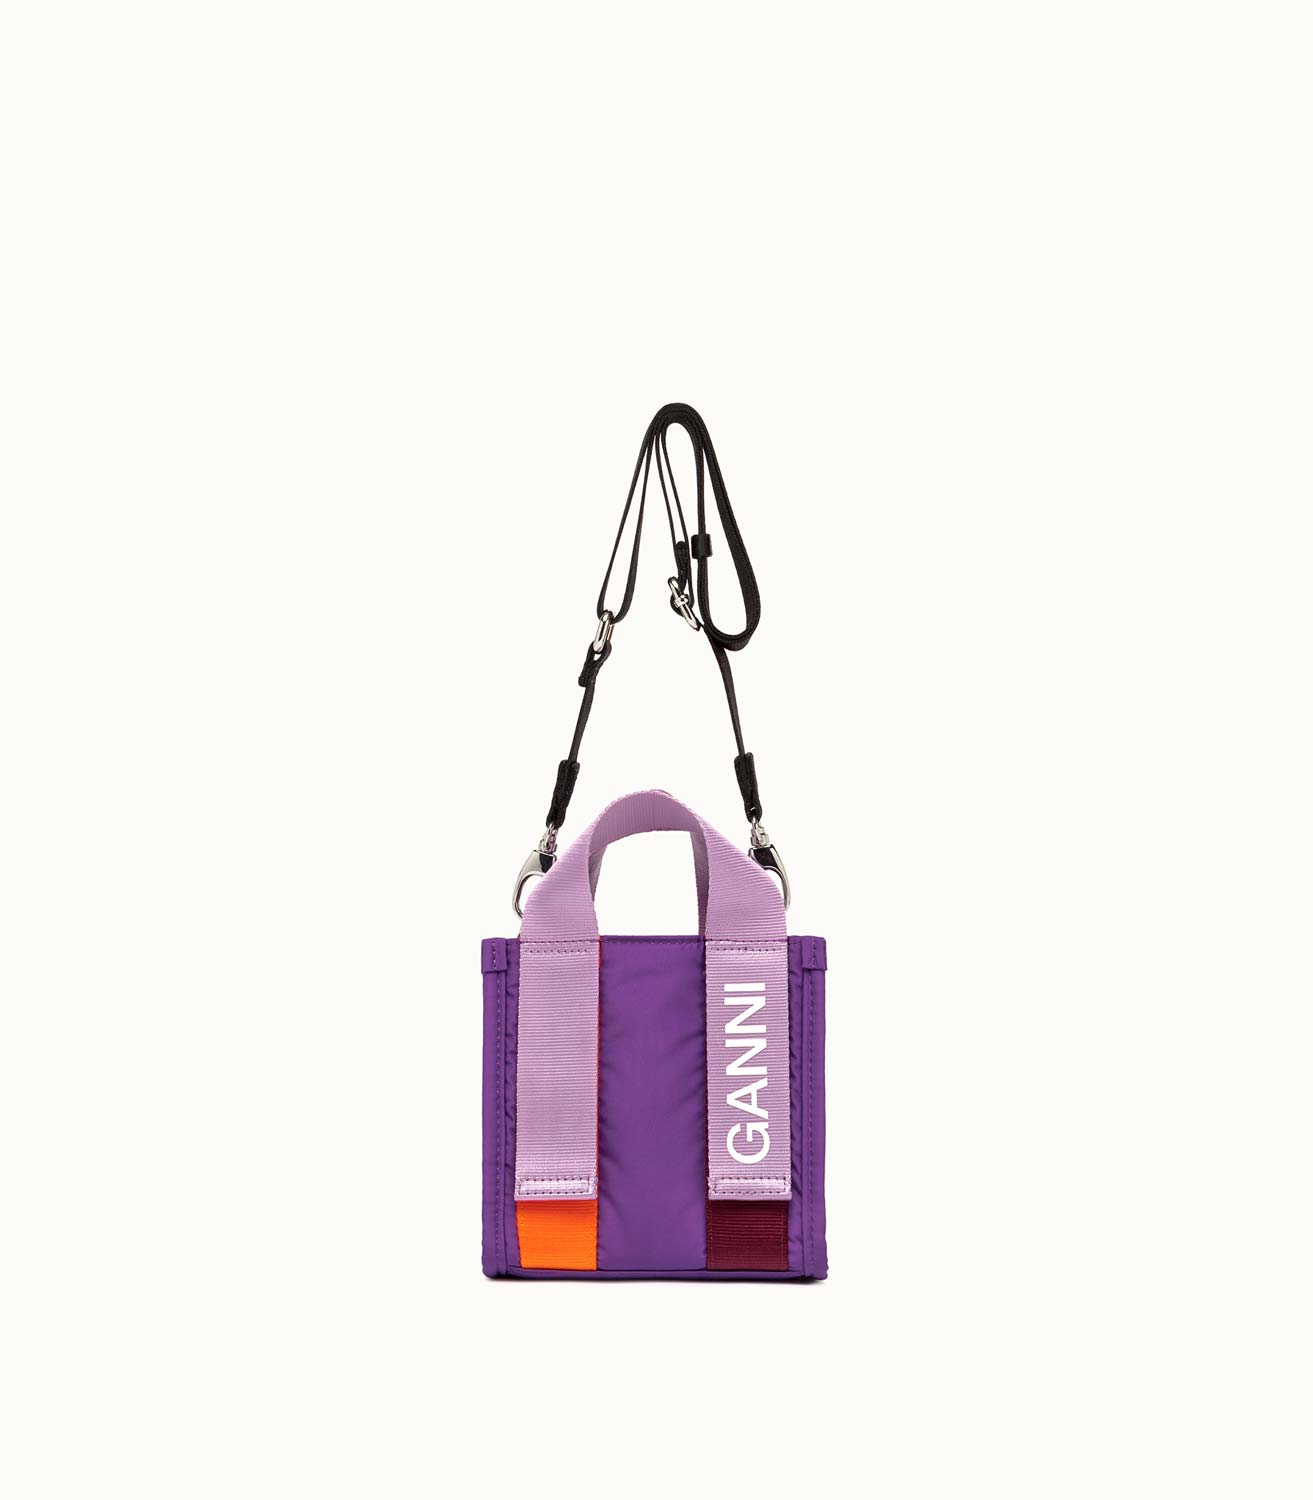 GANNI MINI TOTE BAG IN RECYCLED TECH FABRIC Playground